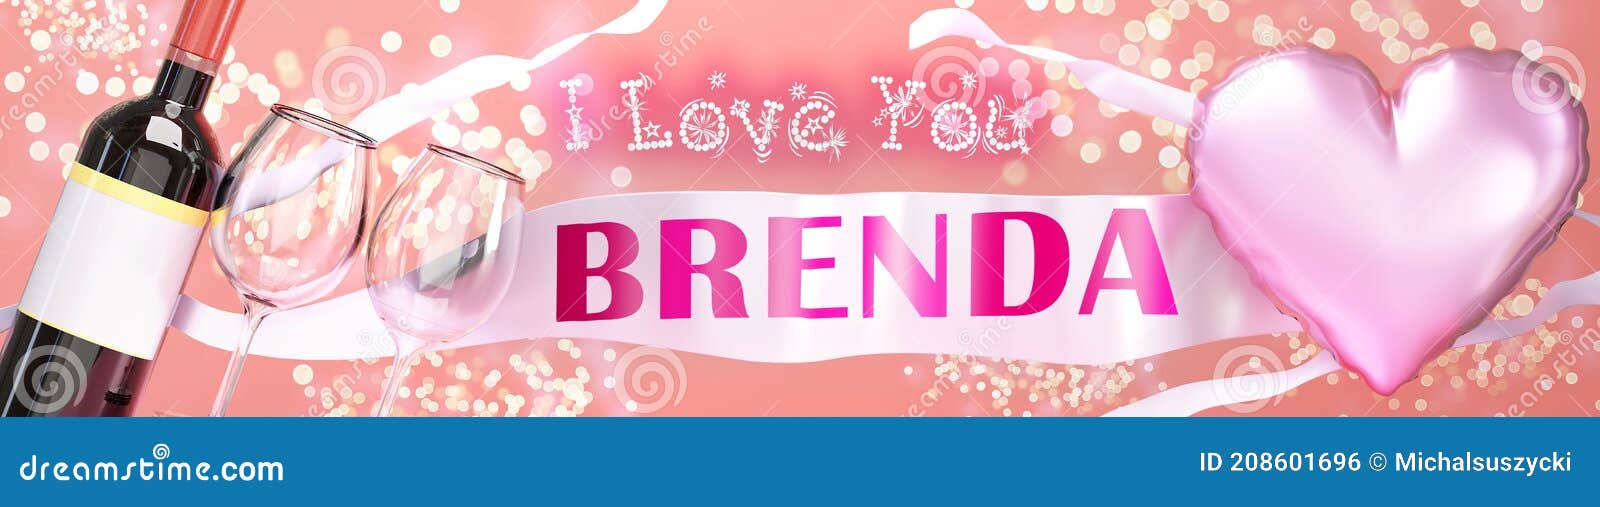 i love you brenda - wedding, valentine`s or just to say i love you celebration card, joyful, happy party style with glitter, wine